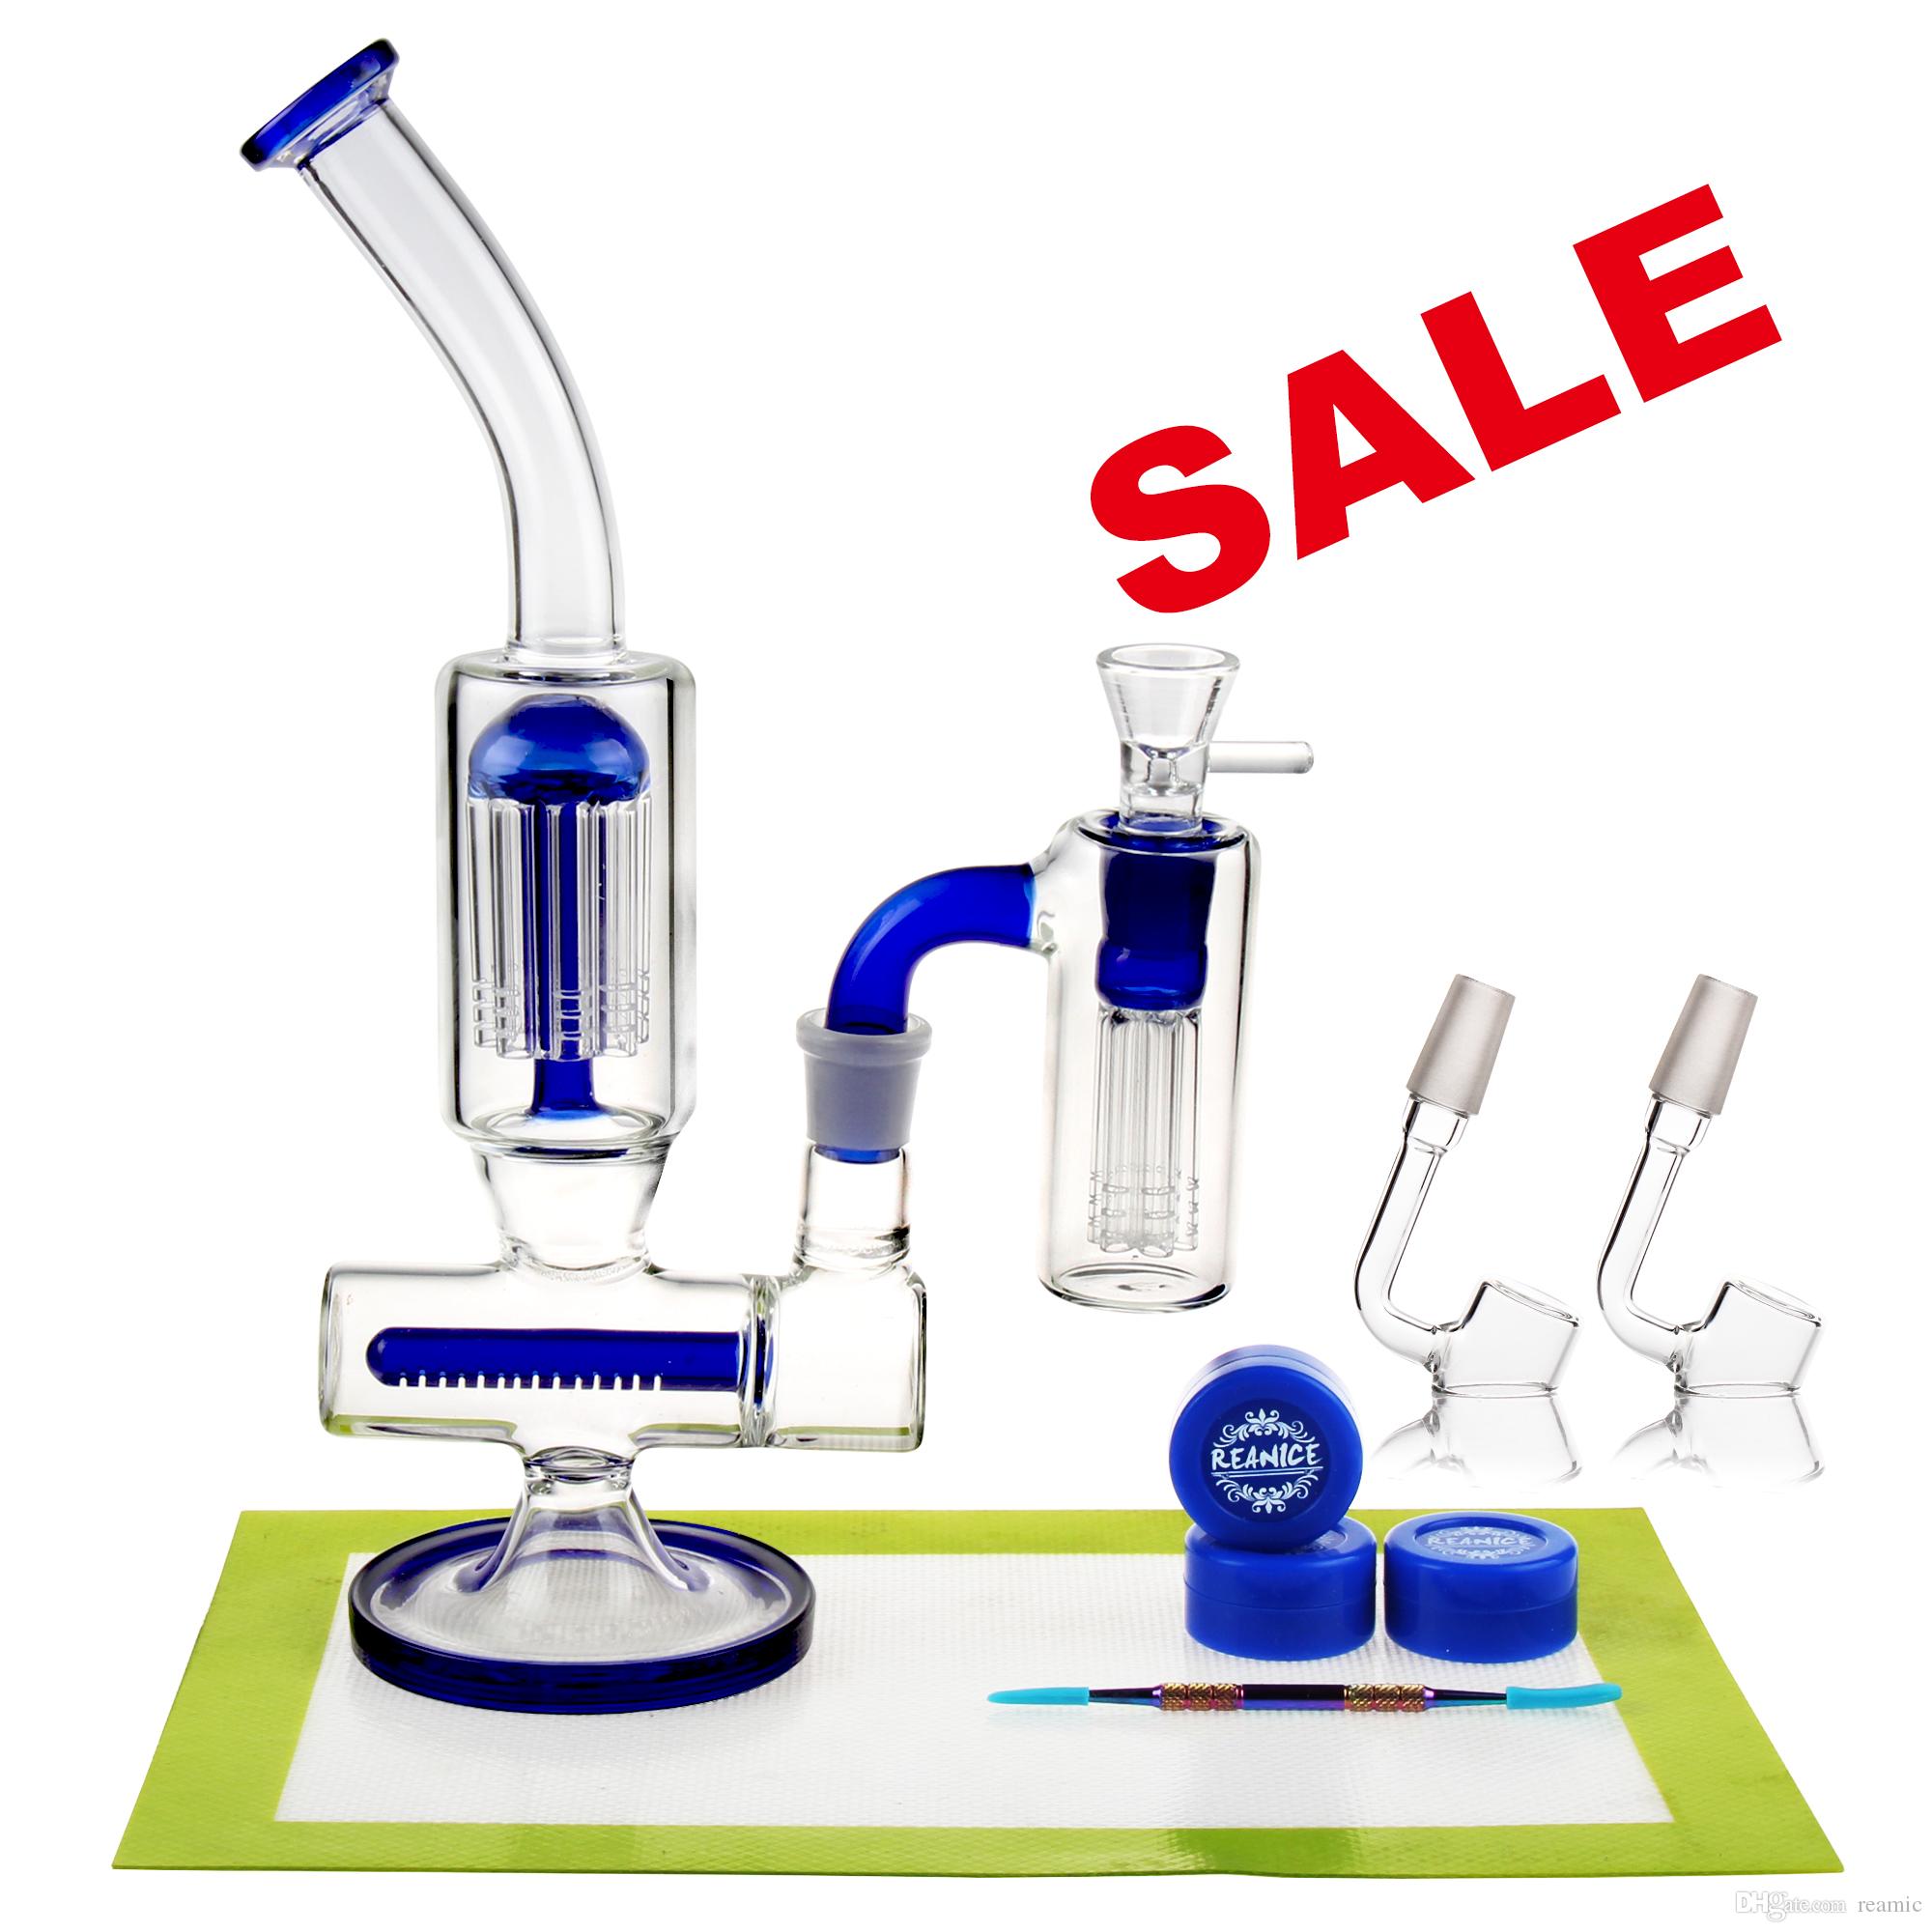 REANICE BOX Newest Glass Recycler 18.8mm Jonit Blue + Silicone mat/Silicone wax/Metal tools spoon glass double recycler bong Cheap Bong